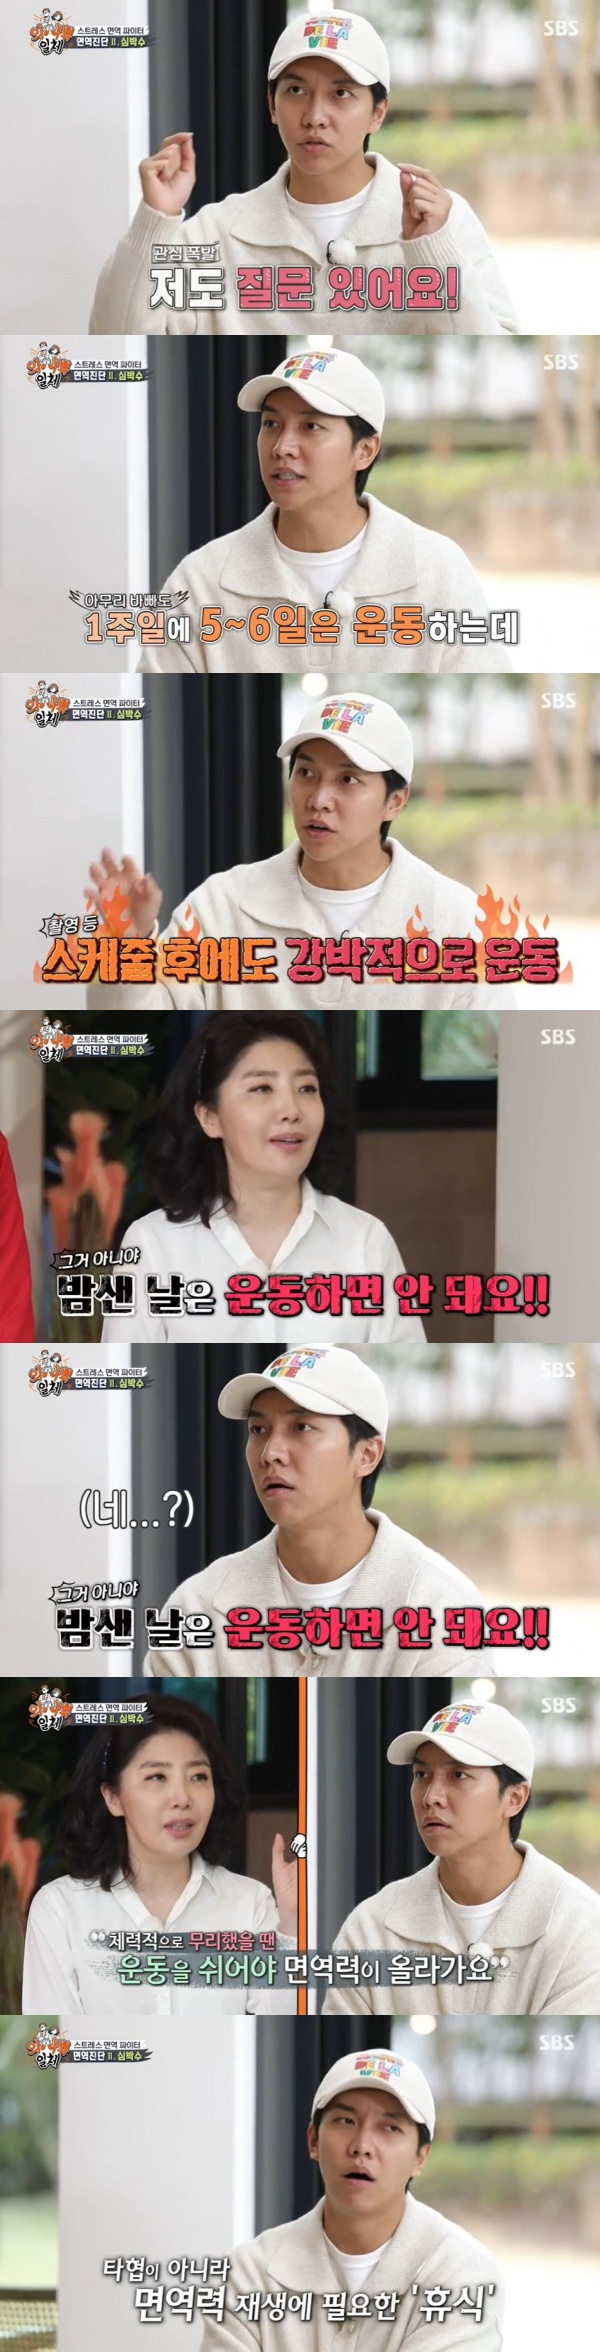 On the 5th, SBS entertainment program All The Butlers depicted the Yeo Esther and Hong Hye-geol couple who advise Lee Seung-gi.Lee Seung-gi said, No matter how busy I am, I will do Exercise for 5 to 6 days a week. I forced Exercise after the schedule to fill the quota.Kim Dong-Hyun reported that the victory is all night and energy is spent even if it is hard; Yang Se-hyung exercises even if it is hard to win.We should not Exercise overnight, said Yeo Esther. We should not Exercise when we are overworked.Exercise is good for your body, but when you are physically overworked, you have to rest Exercise to improve your Immunity, he added.Meanwhile, All The Butlers is a life extracurricular entertainment program with youths full of question marks and myway geek masters. It airs every Sunday at 6:25 p.m.Photo SBS broadcast screen capture